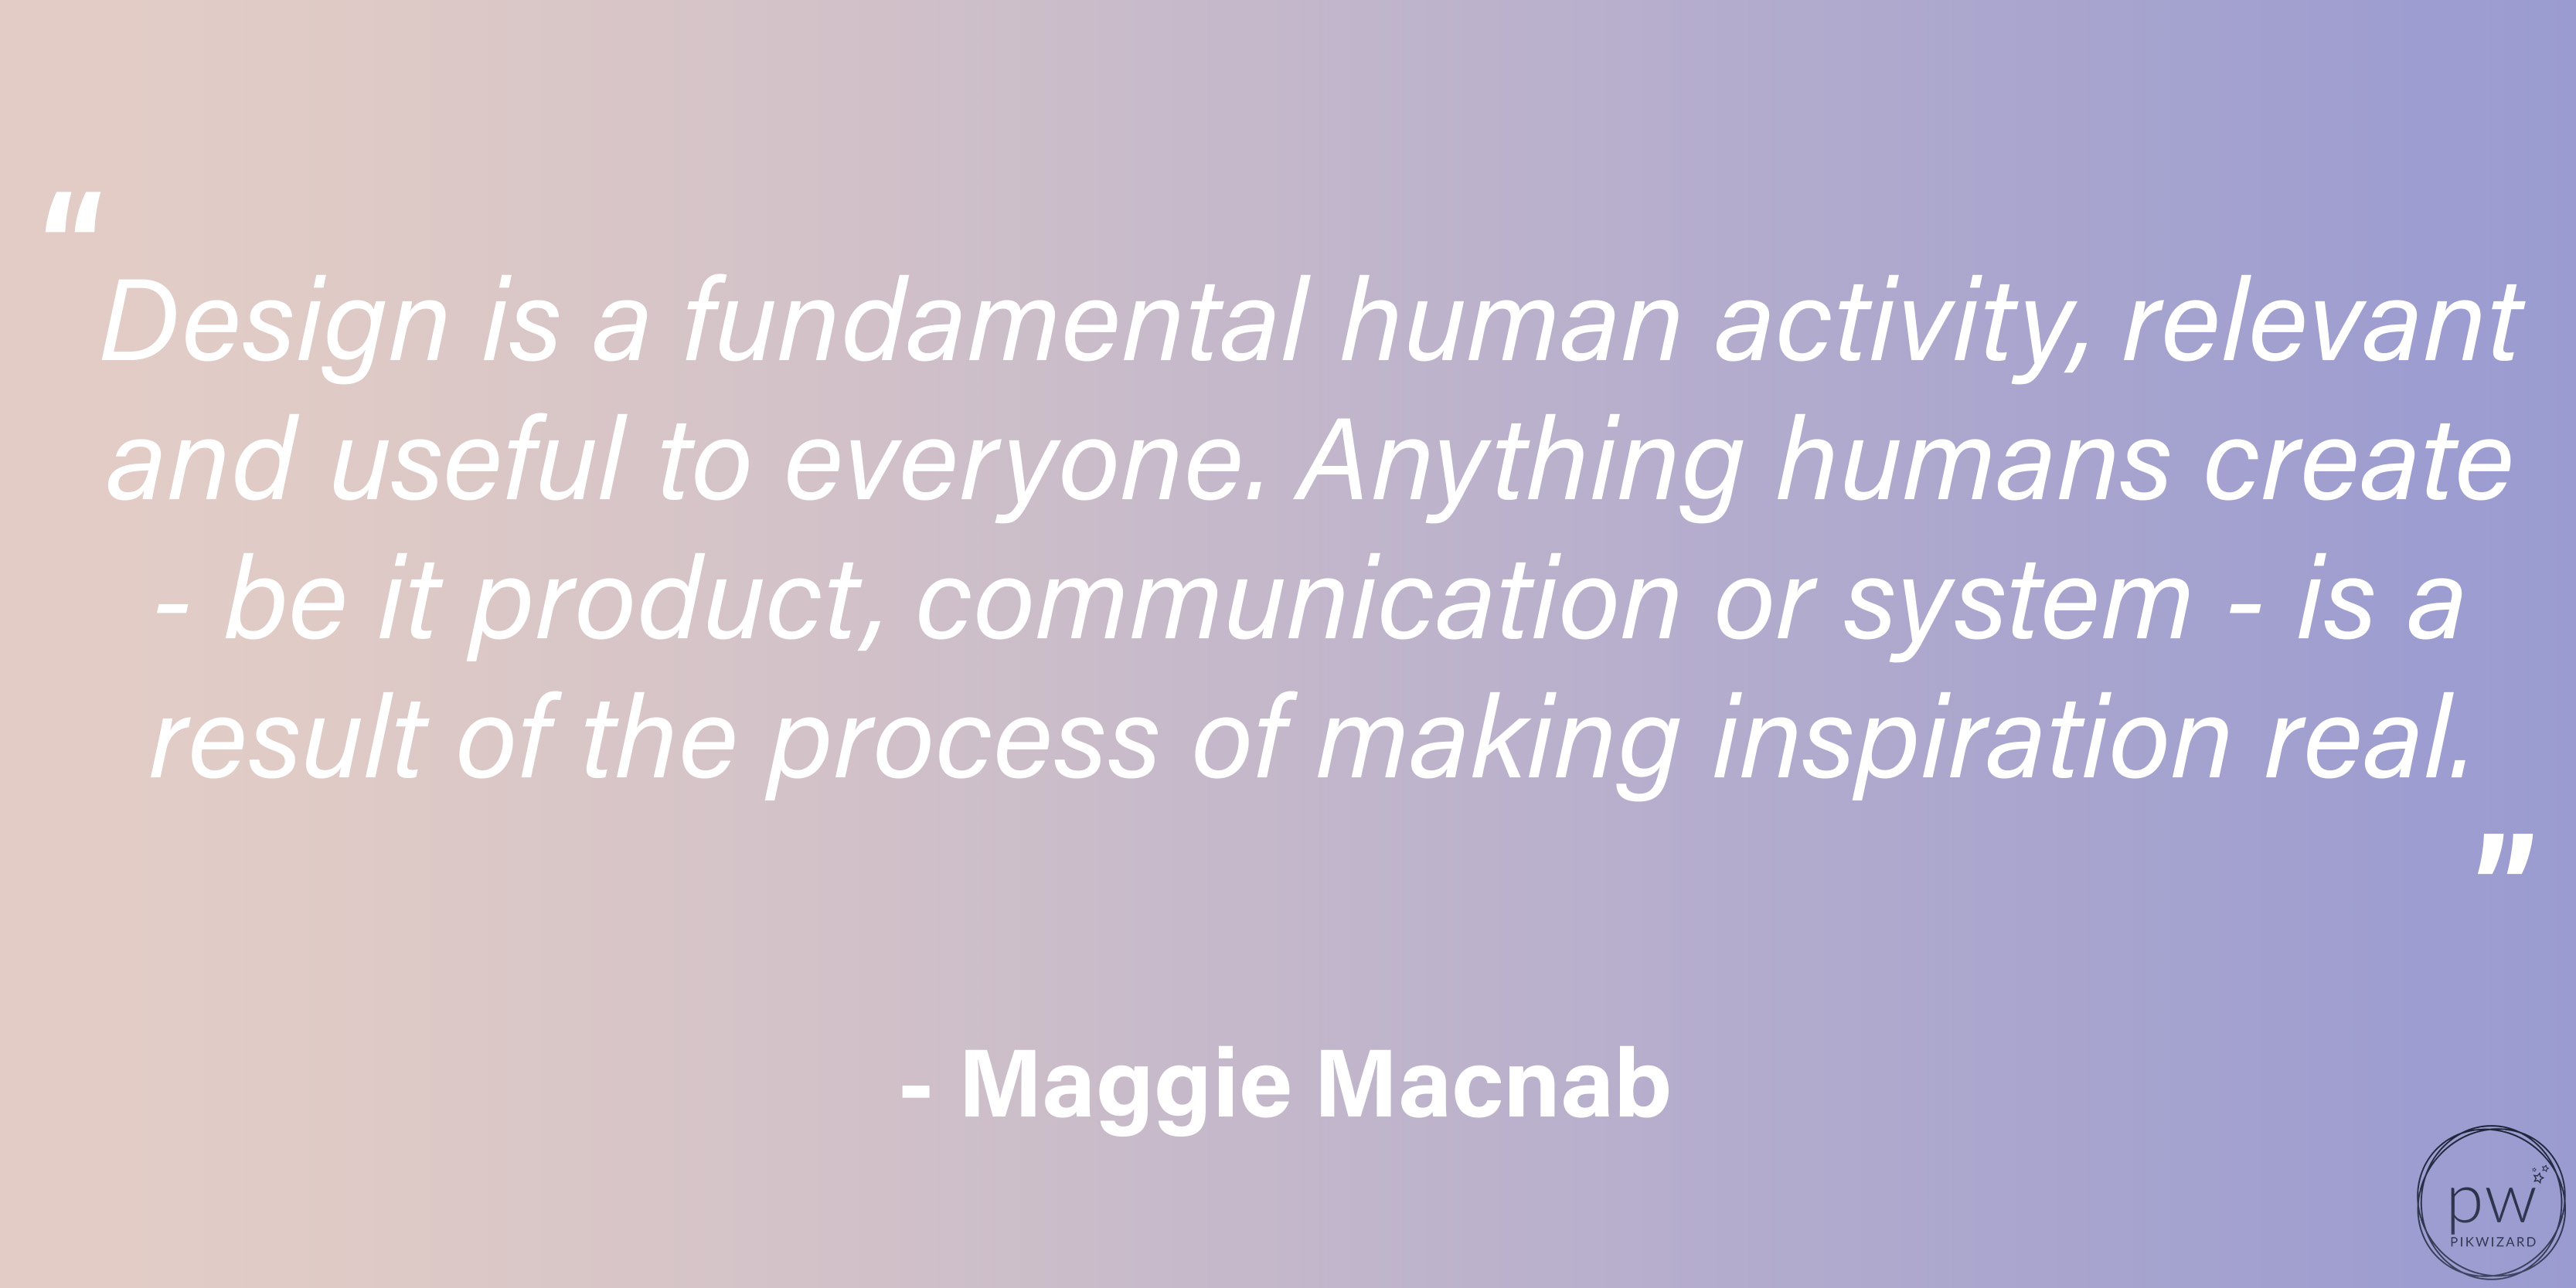 Maggie Macnab quote on a purple and pink gradient background - Creativity behind product design - Image